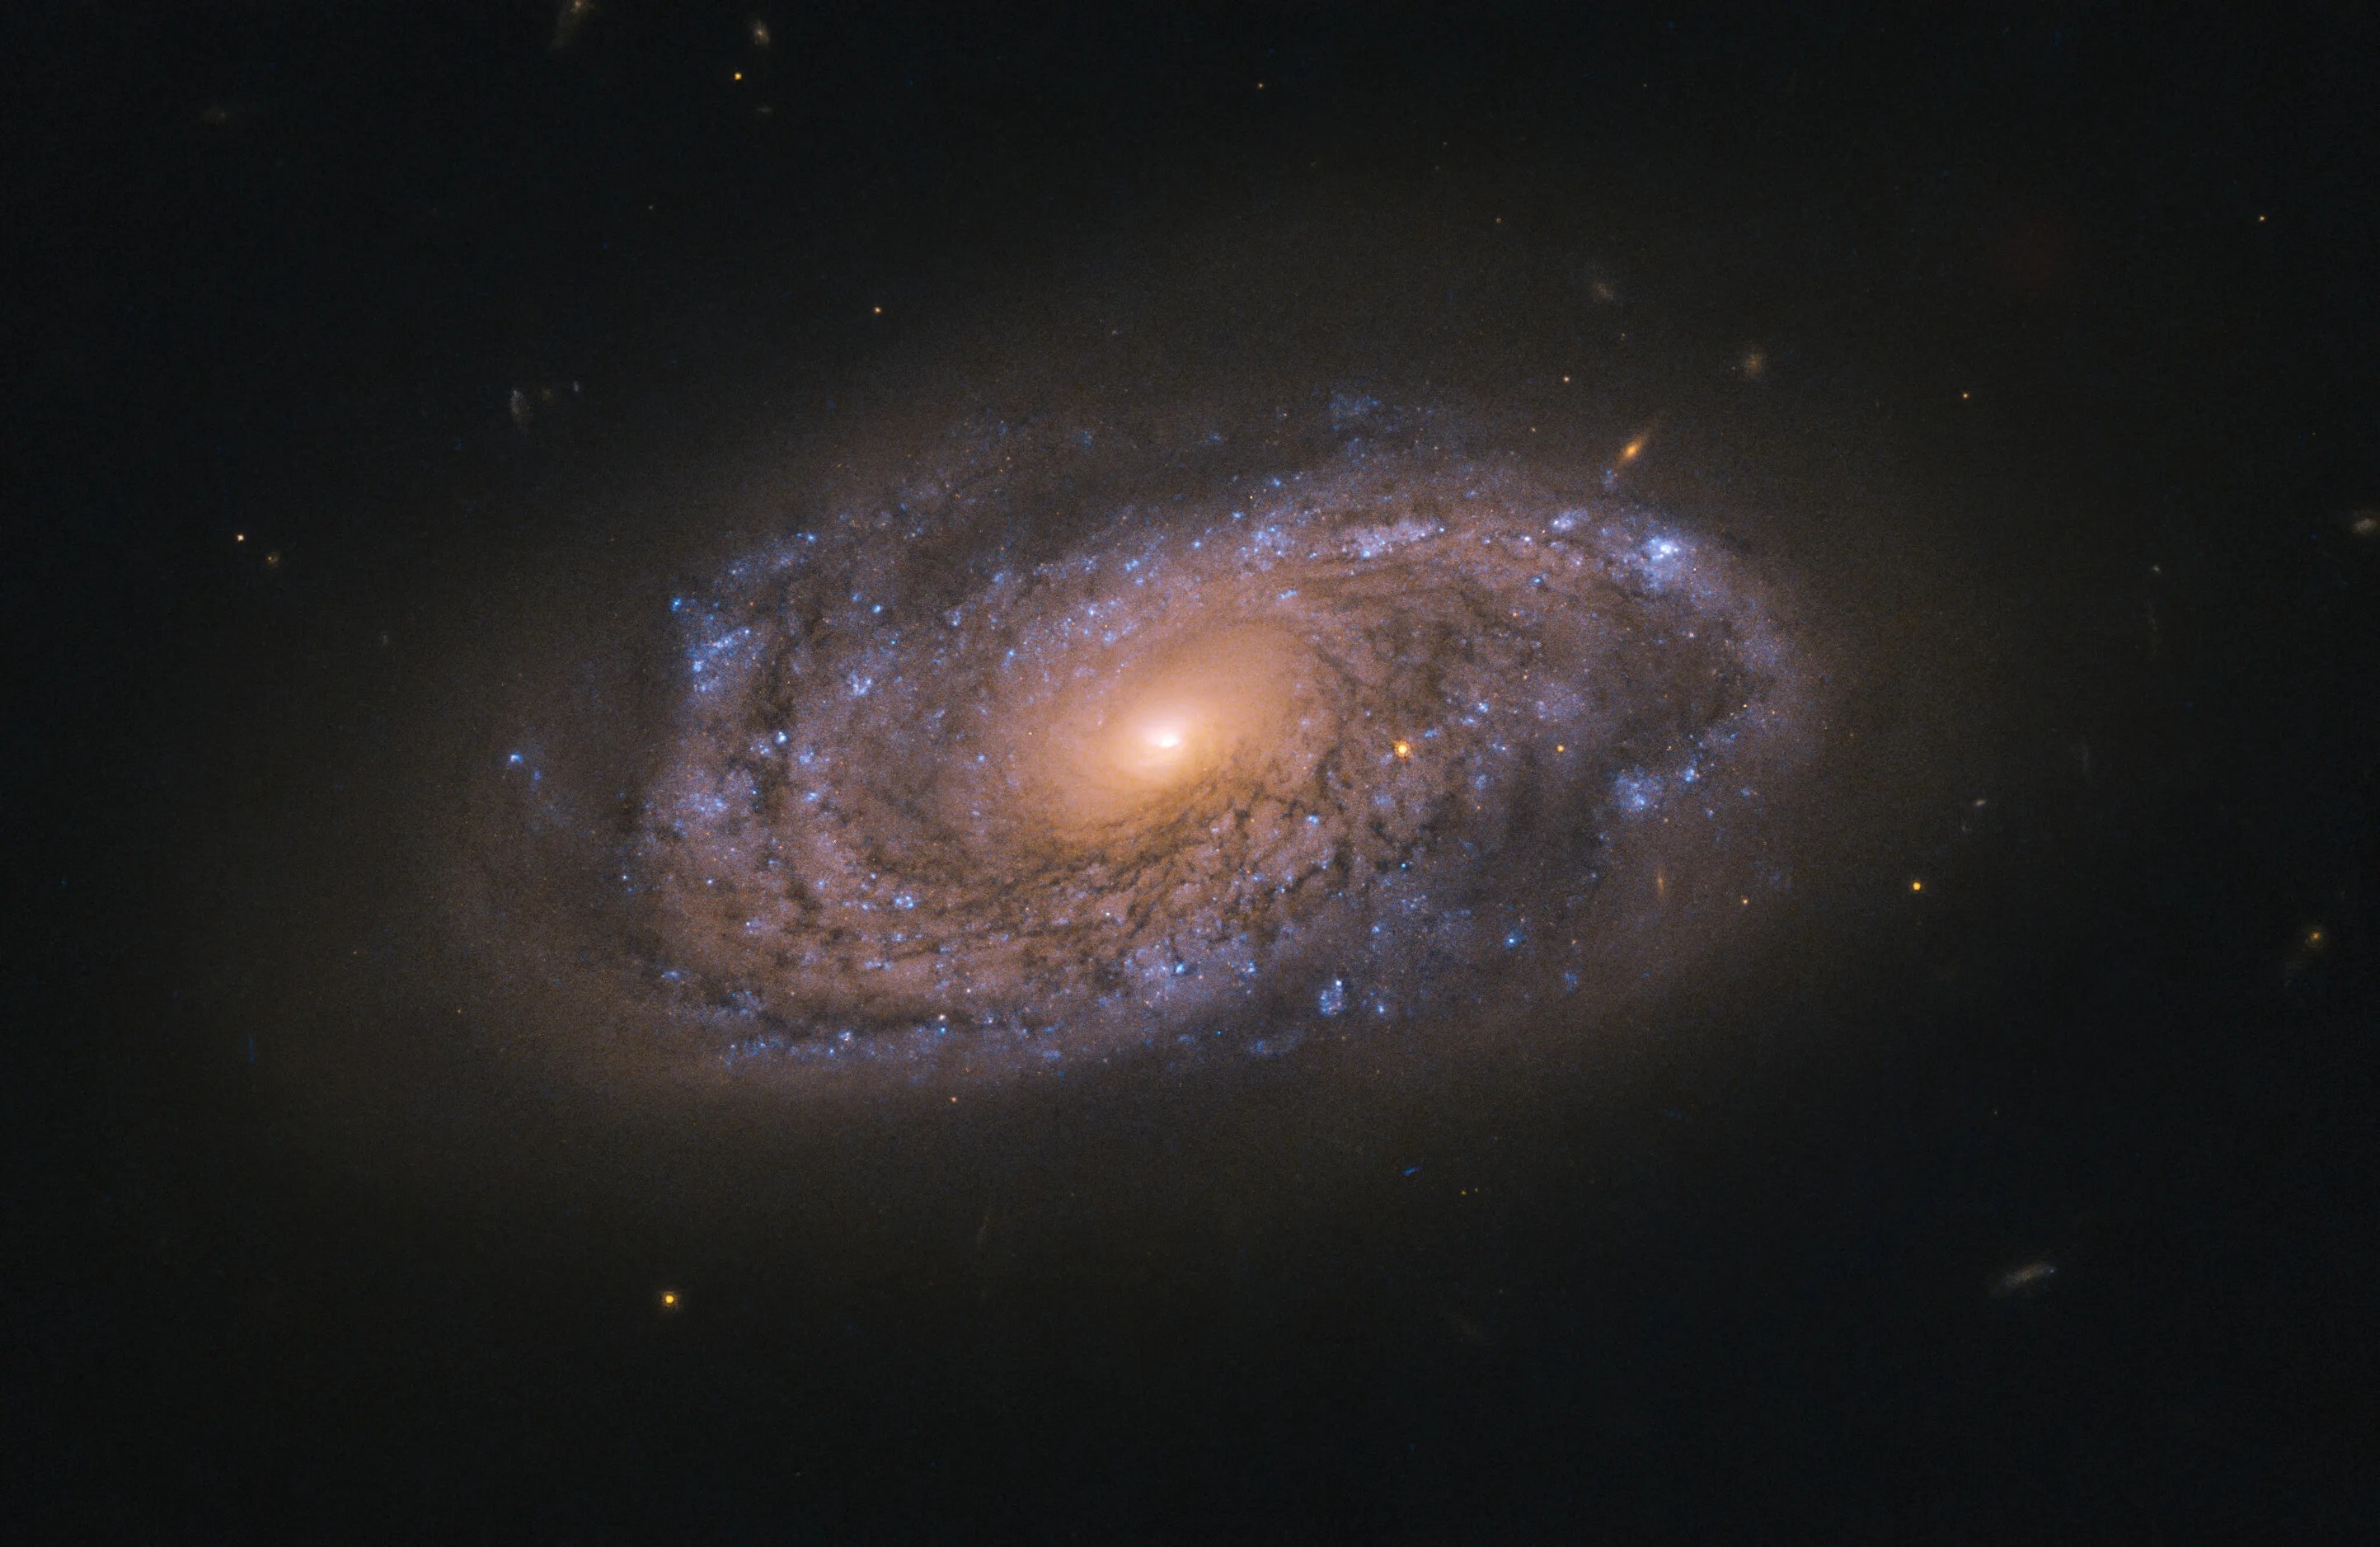 Swirling spiral galaxy named ngc 2906, as seen by hubble